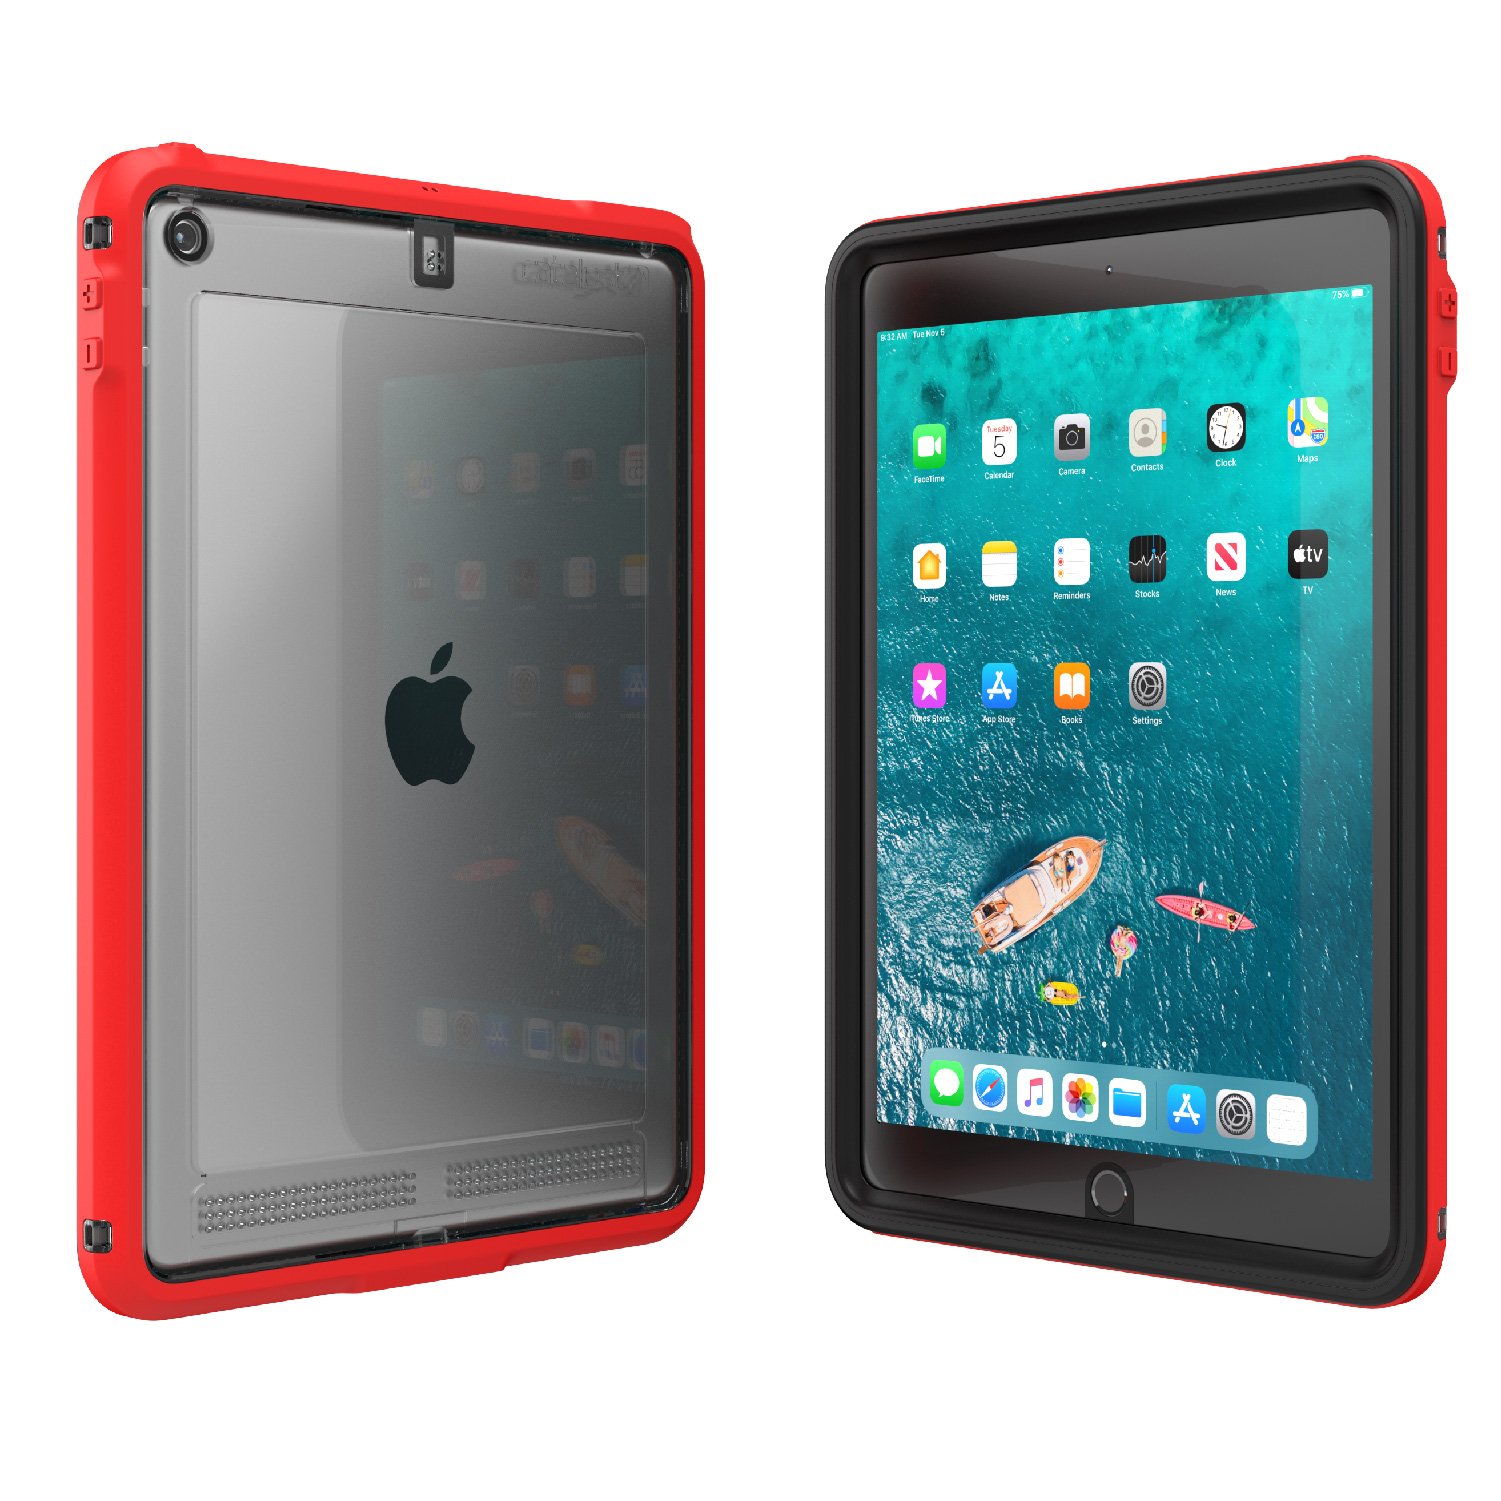 The best rated waterproof iPad case: Catalyst's drop proof and water proof iPad case